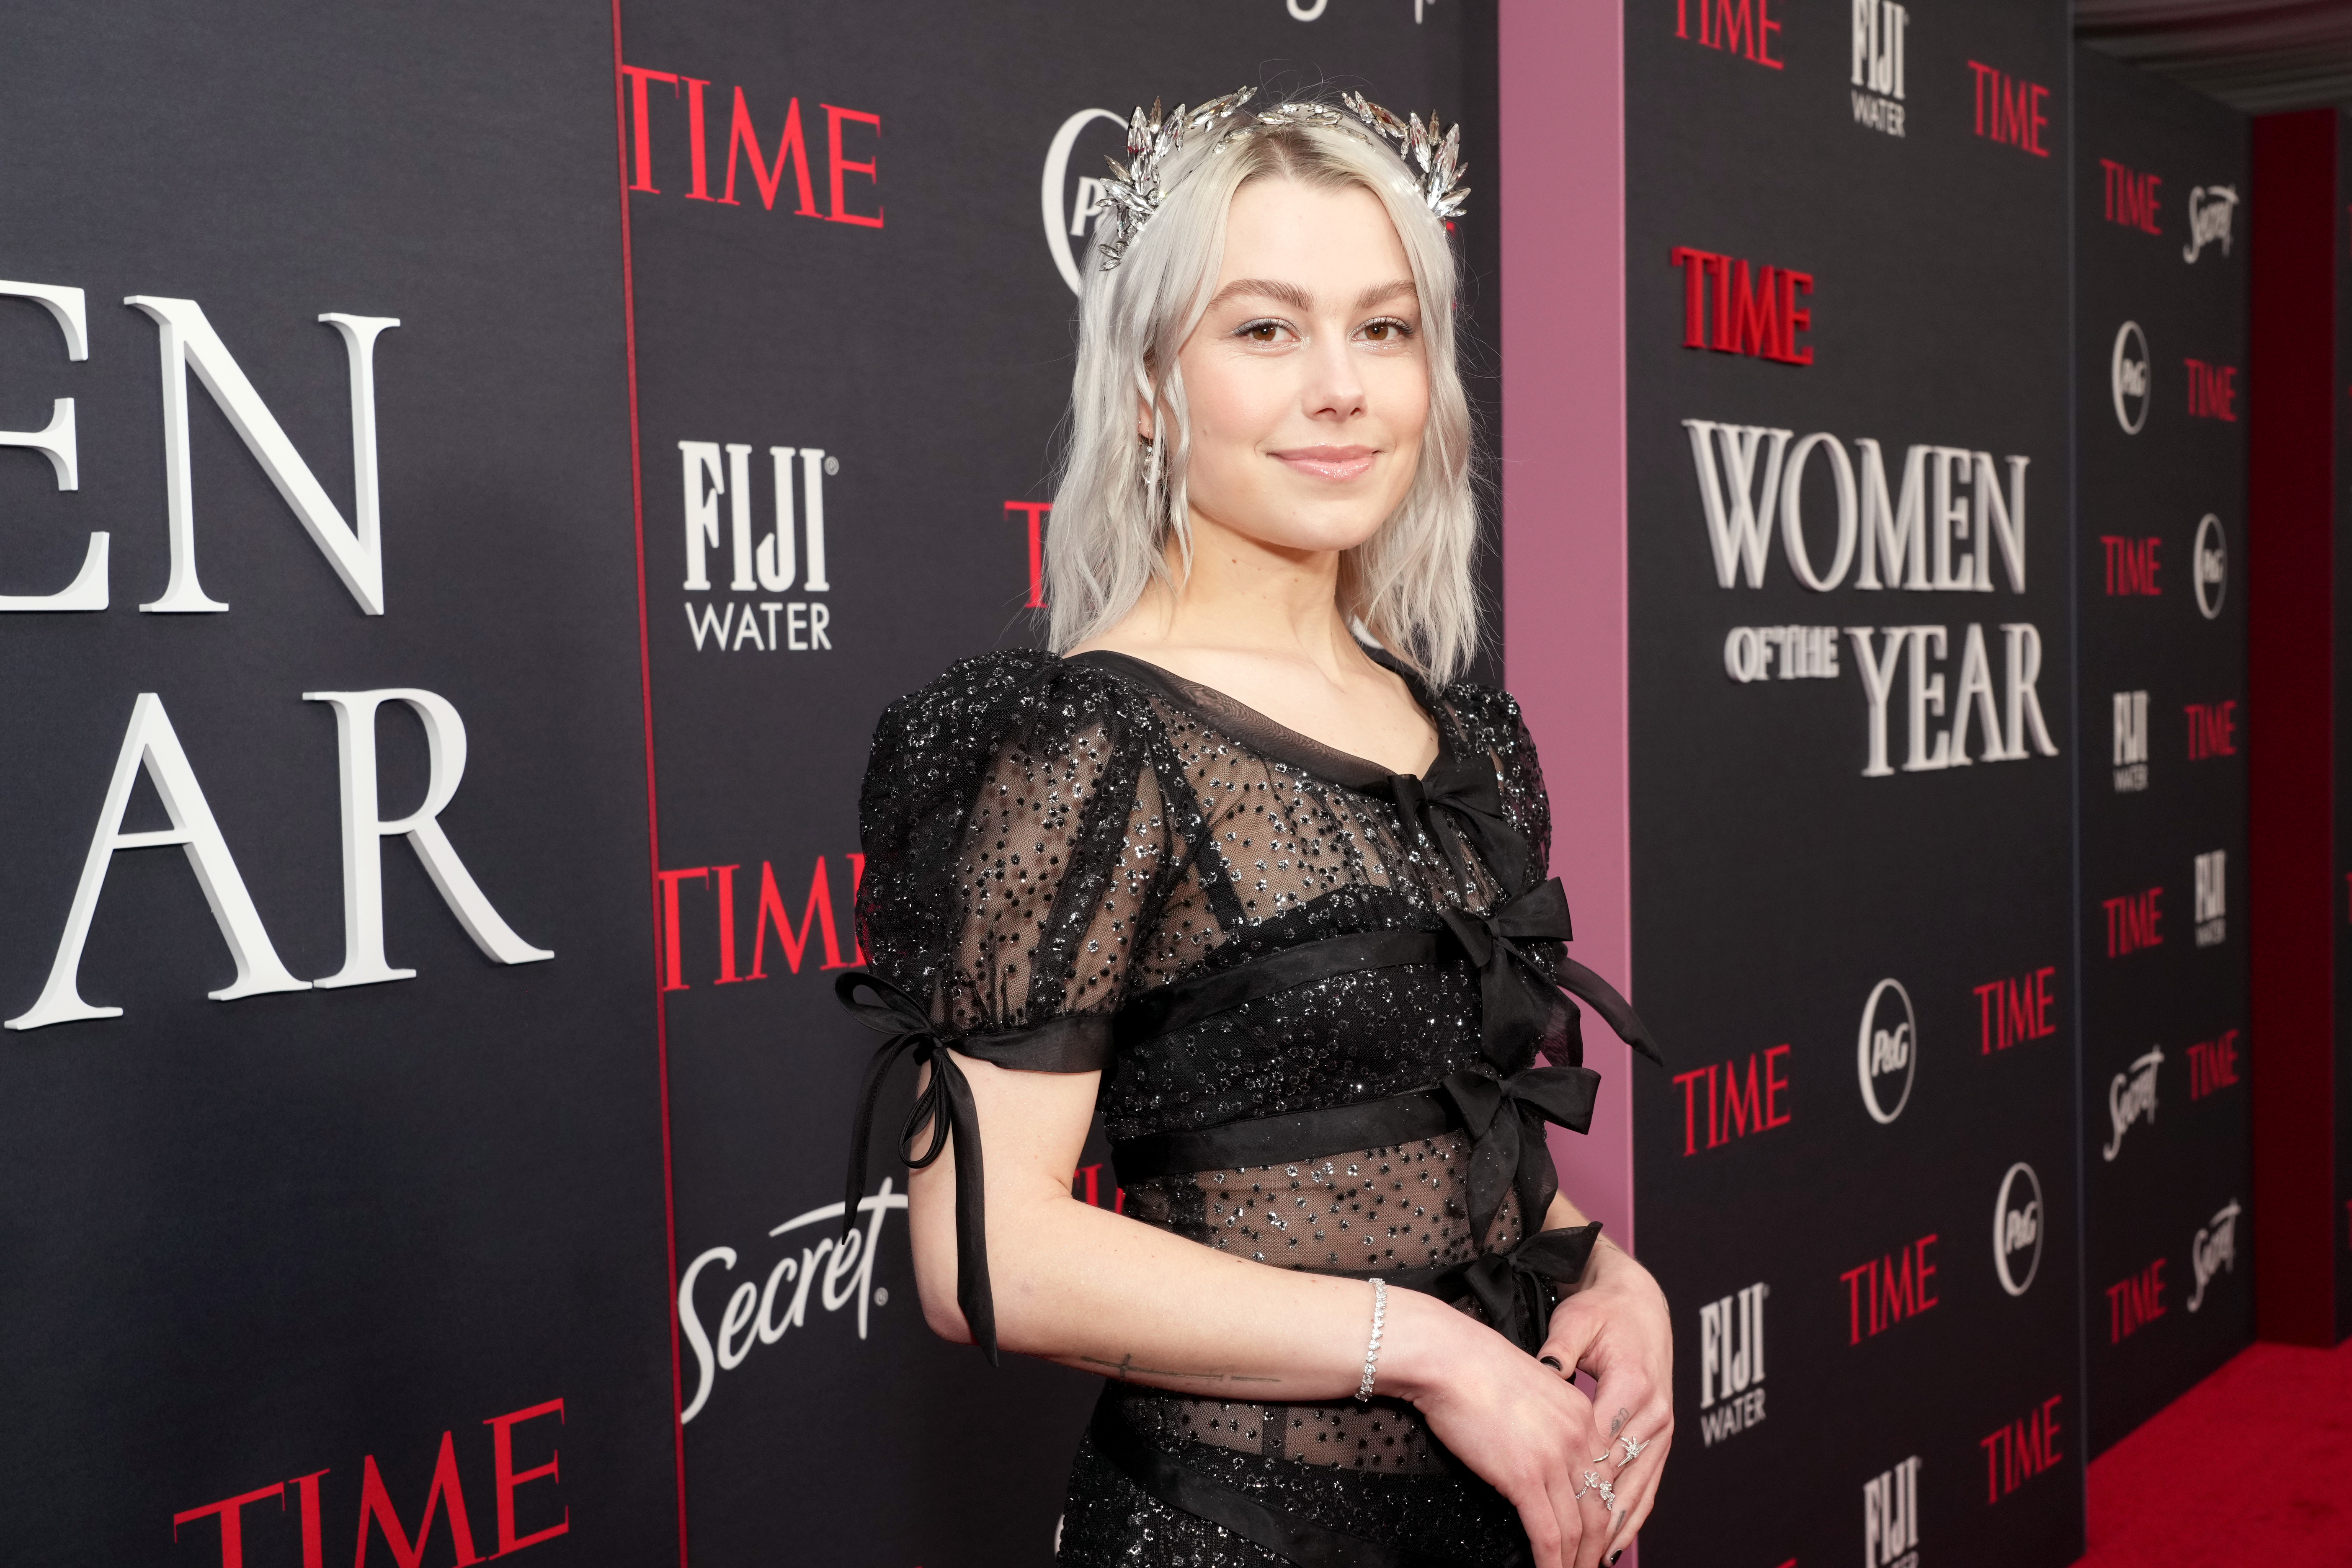 Phoebe Bridgers in the raptor pose at the TIME Women of the Year on March 8, 2023, in Los Angeles | Source: Getty Images